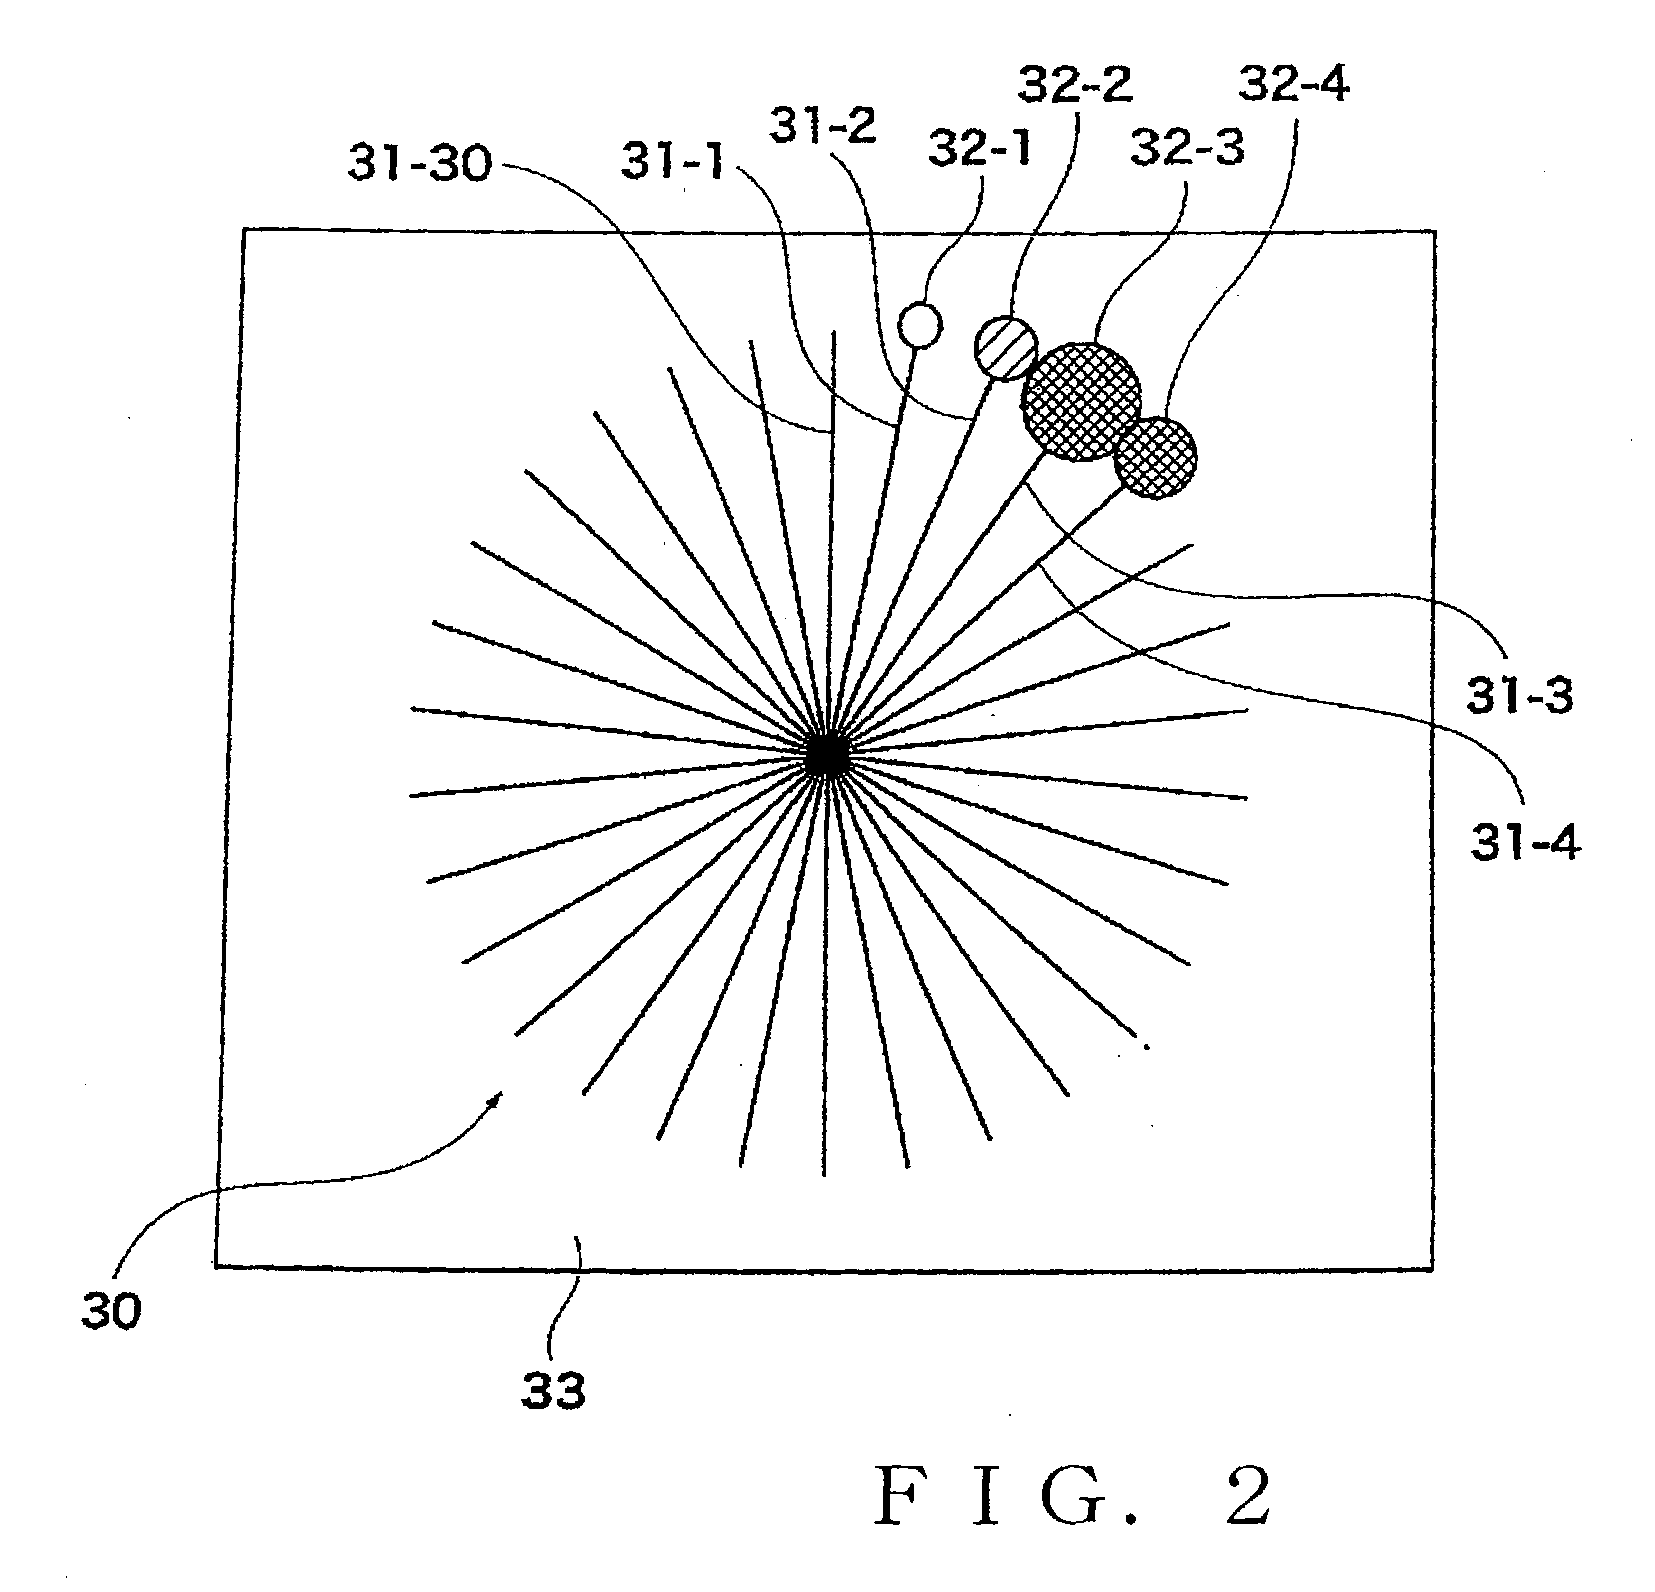 Apparatus for displaying fitness exercise condition